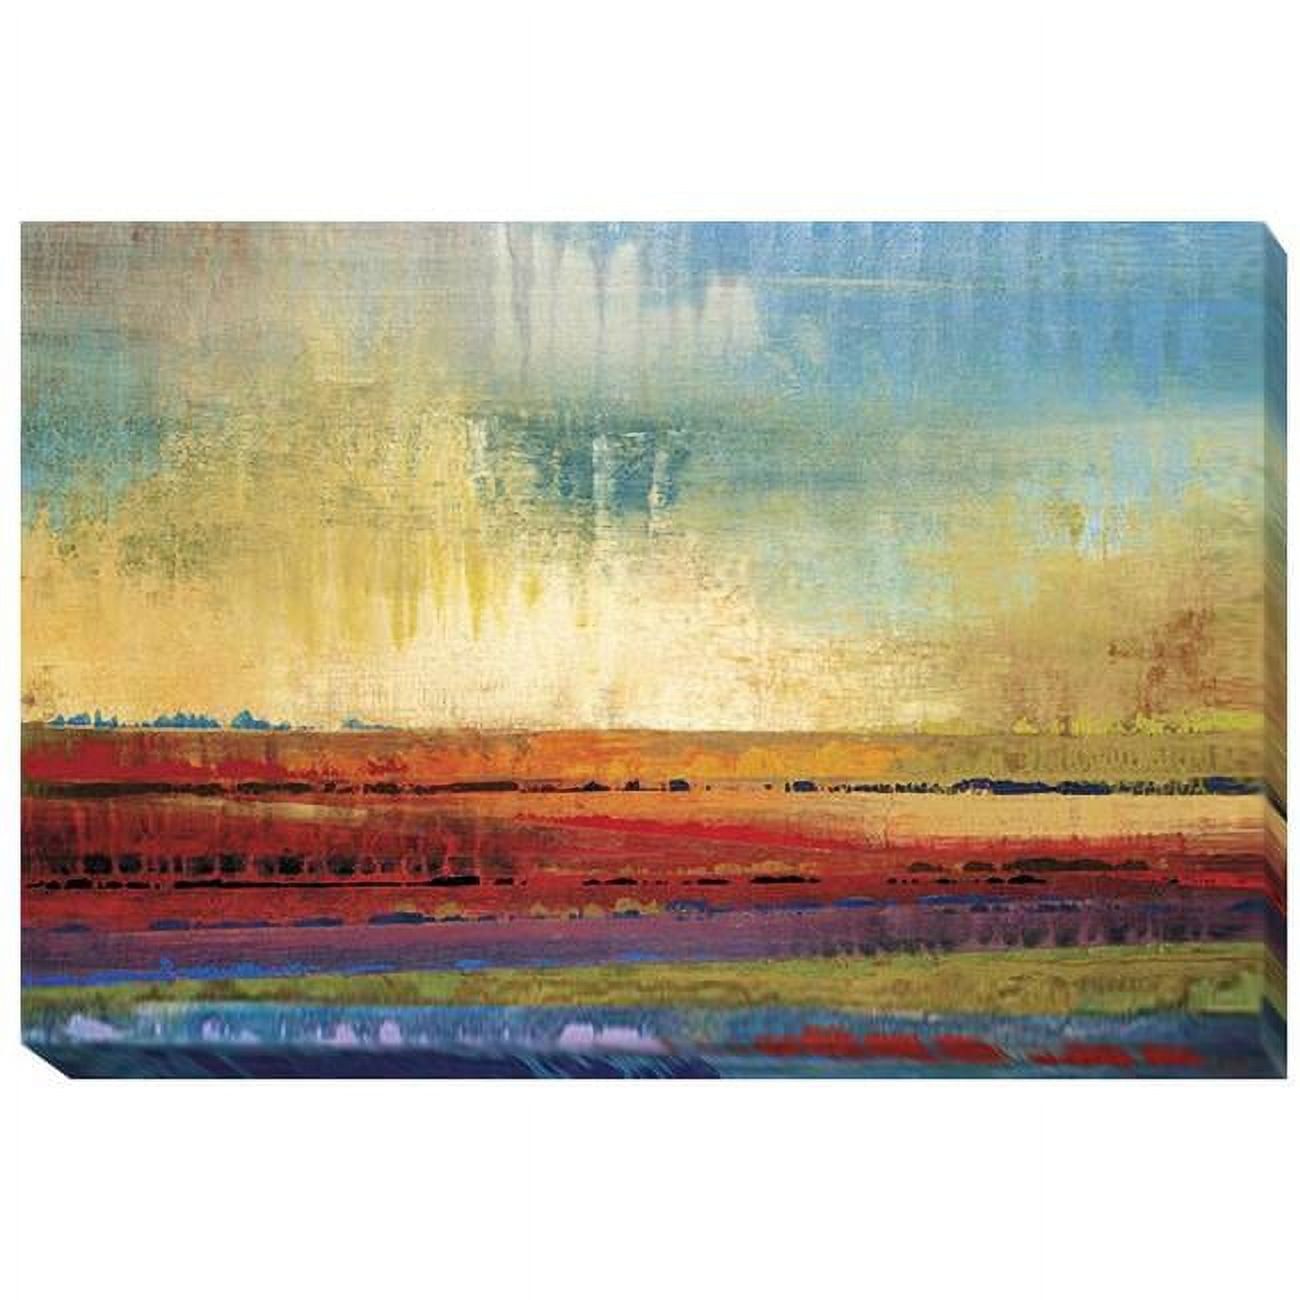 Artistic Home Gallery 2436I125EG Horizons I by Selina Rodriguez Premium Gallery-Wrapped Canvas Giclee Art - Ready to Hang, 24 x 36 x 1.5 in.